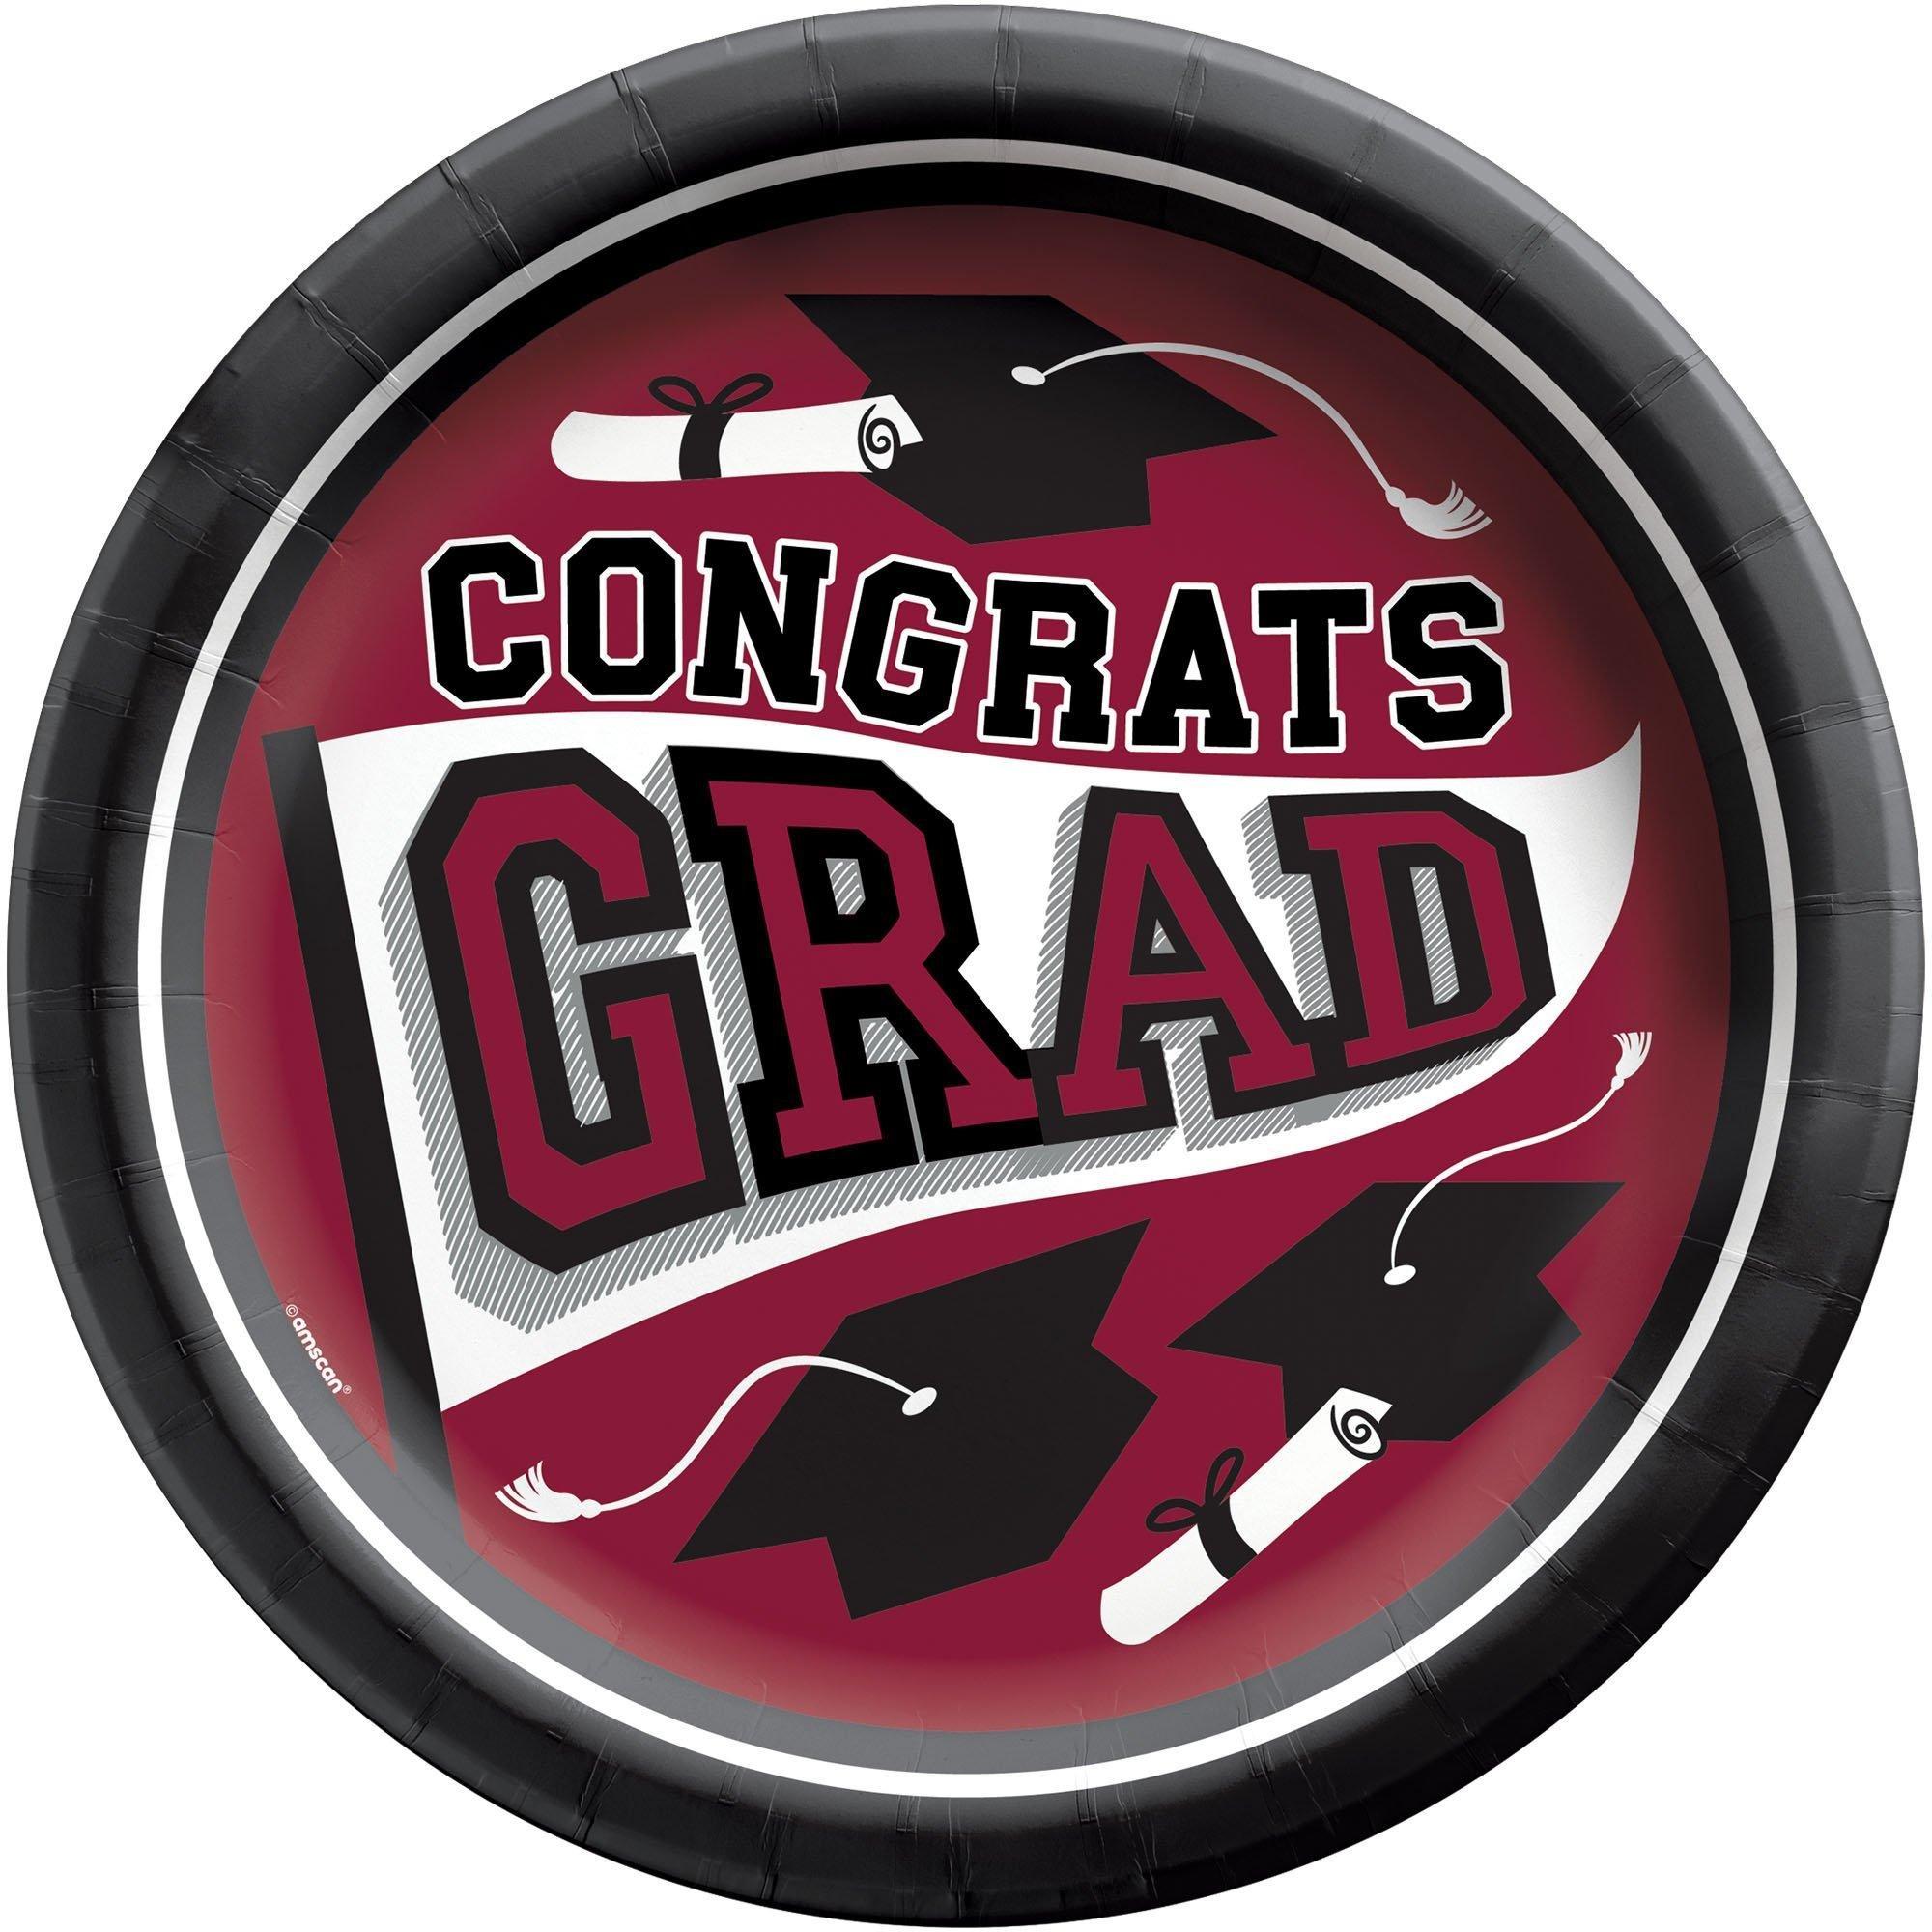 Graduation Party Supplies Kit for 40 with Decorations, Banners, Plates, Napkins, Cups - Maroon Congrats Grad